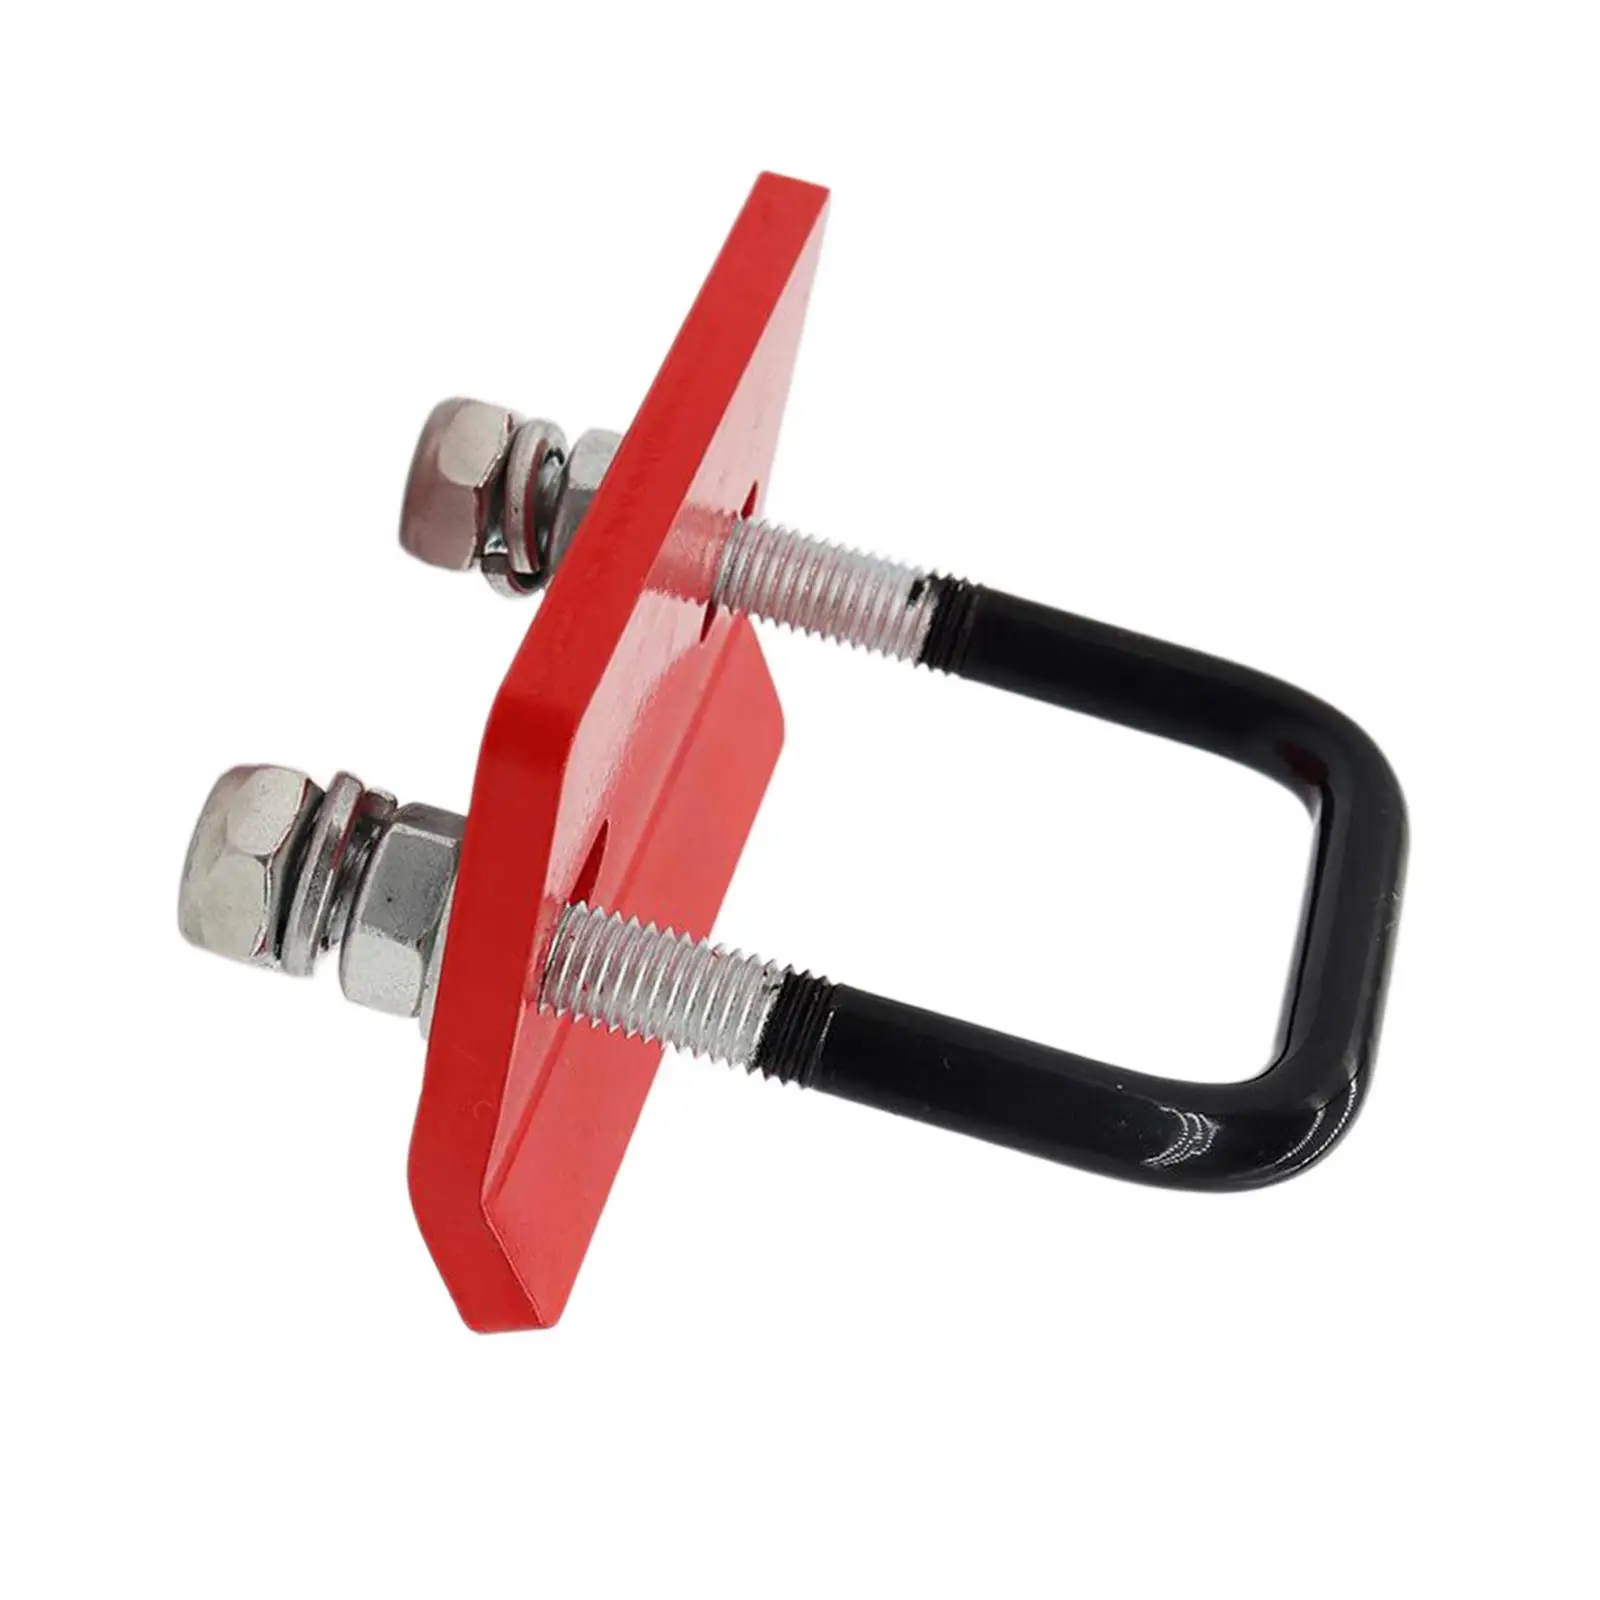 Alloy Steel Hitch Tightener Lock Down Tow Clamp for Trailer Hitch Tray Boat